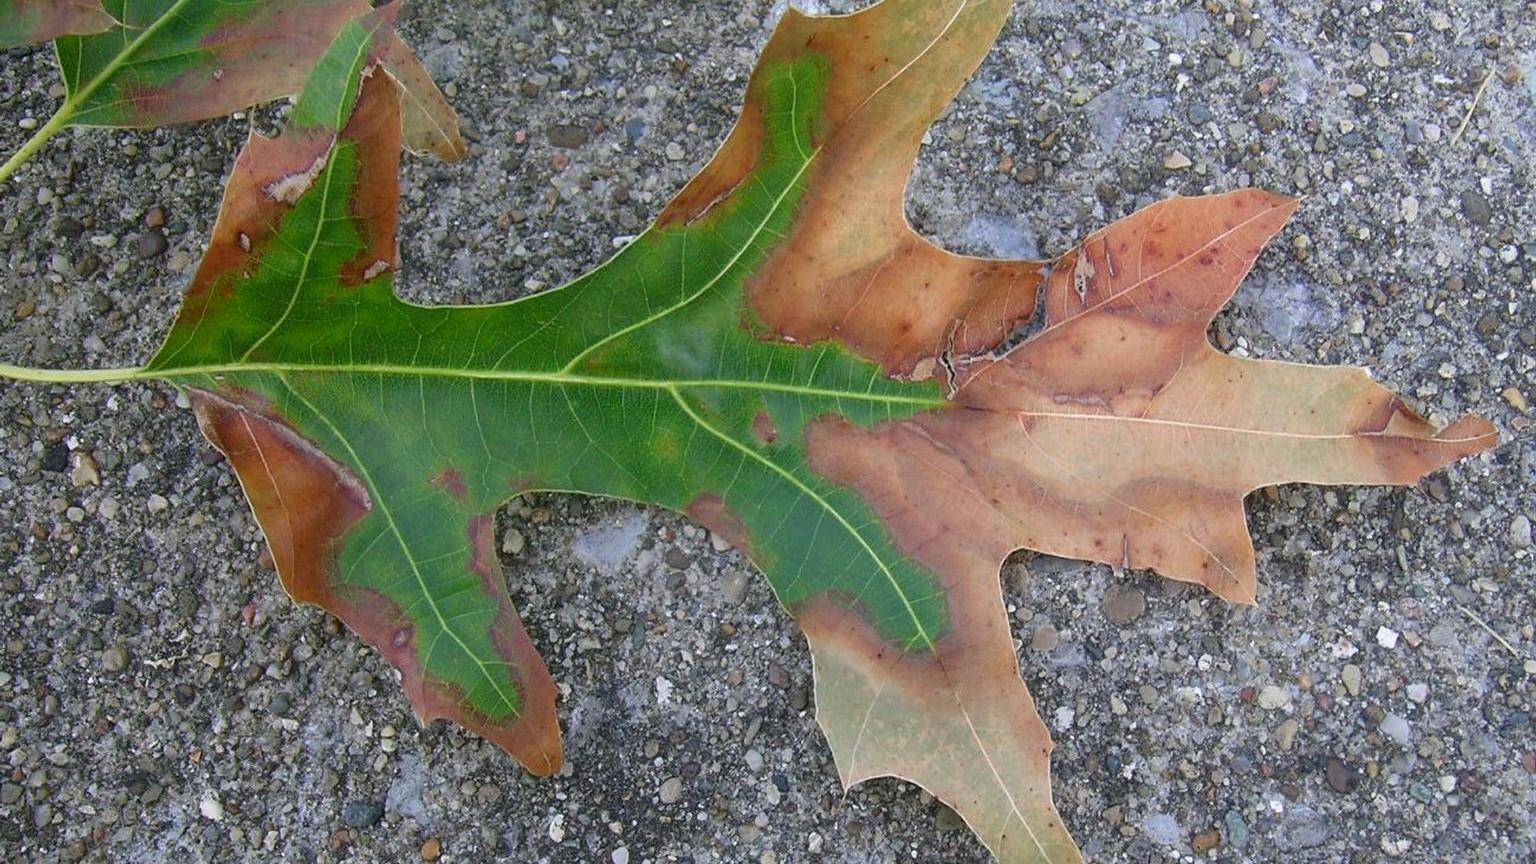 oak leaves discolored and turning brown early - bacterial leaf scorch symptoms